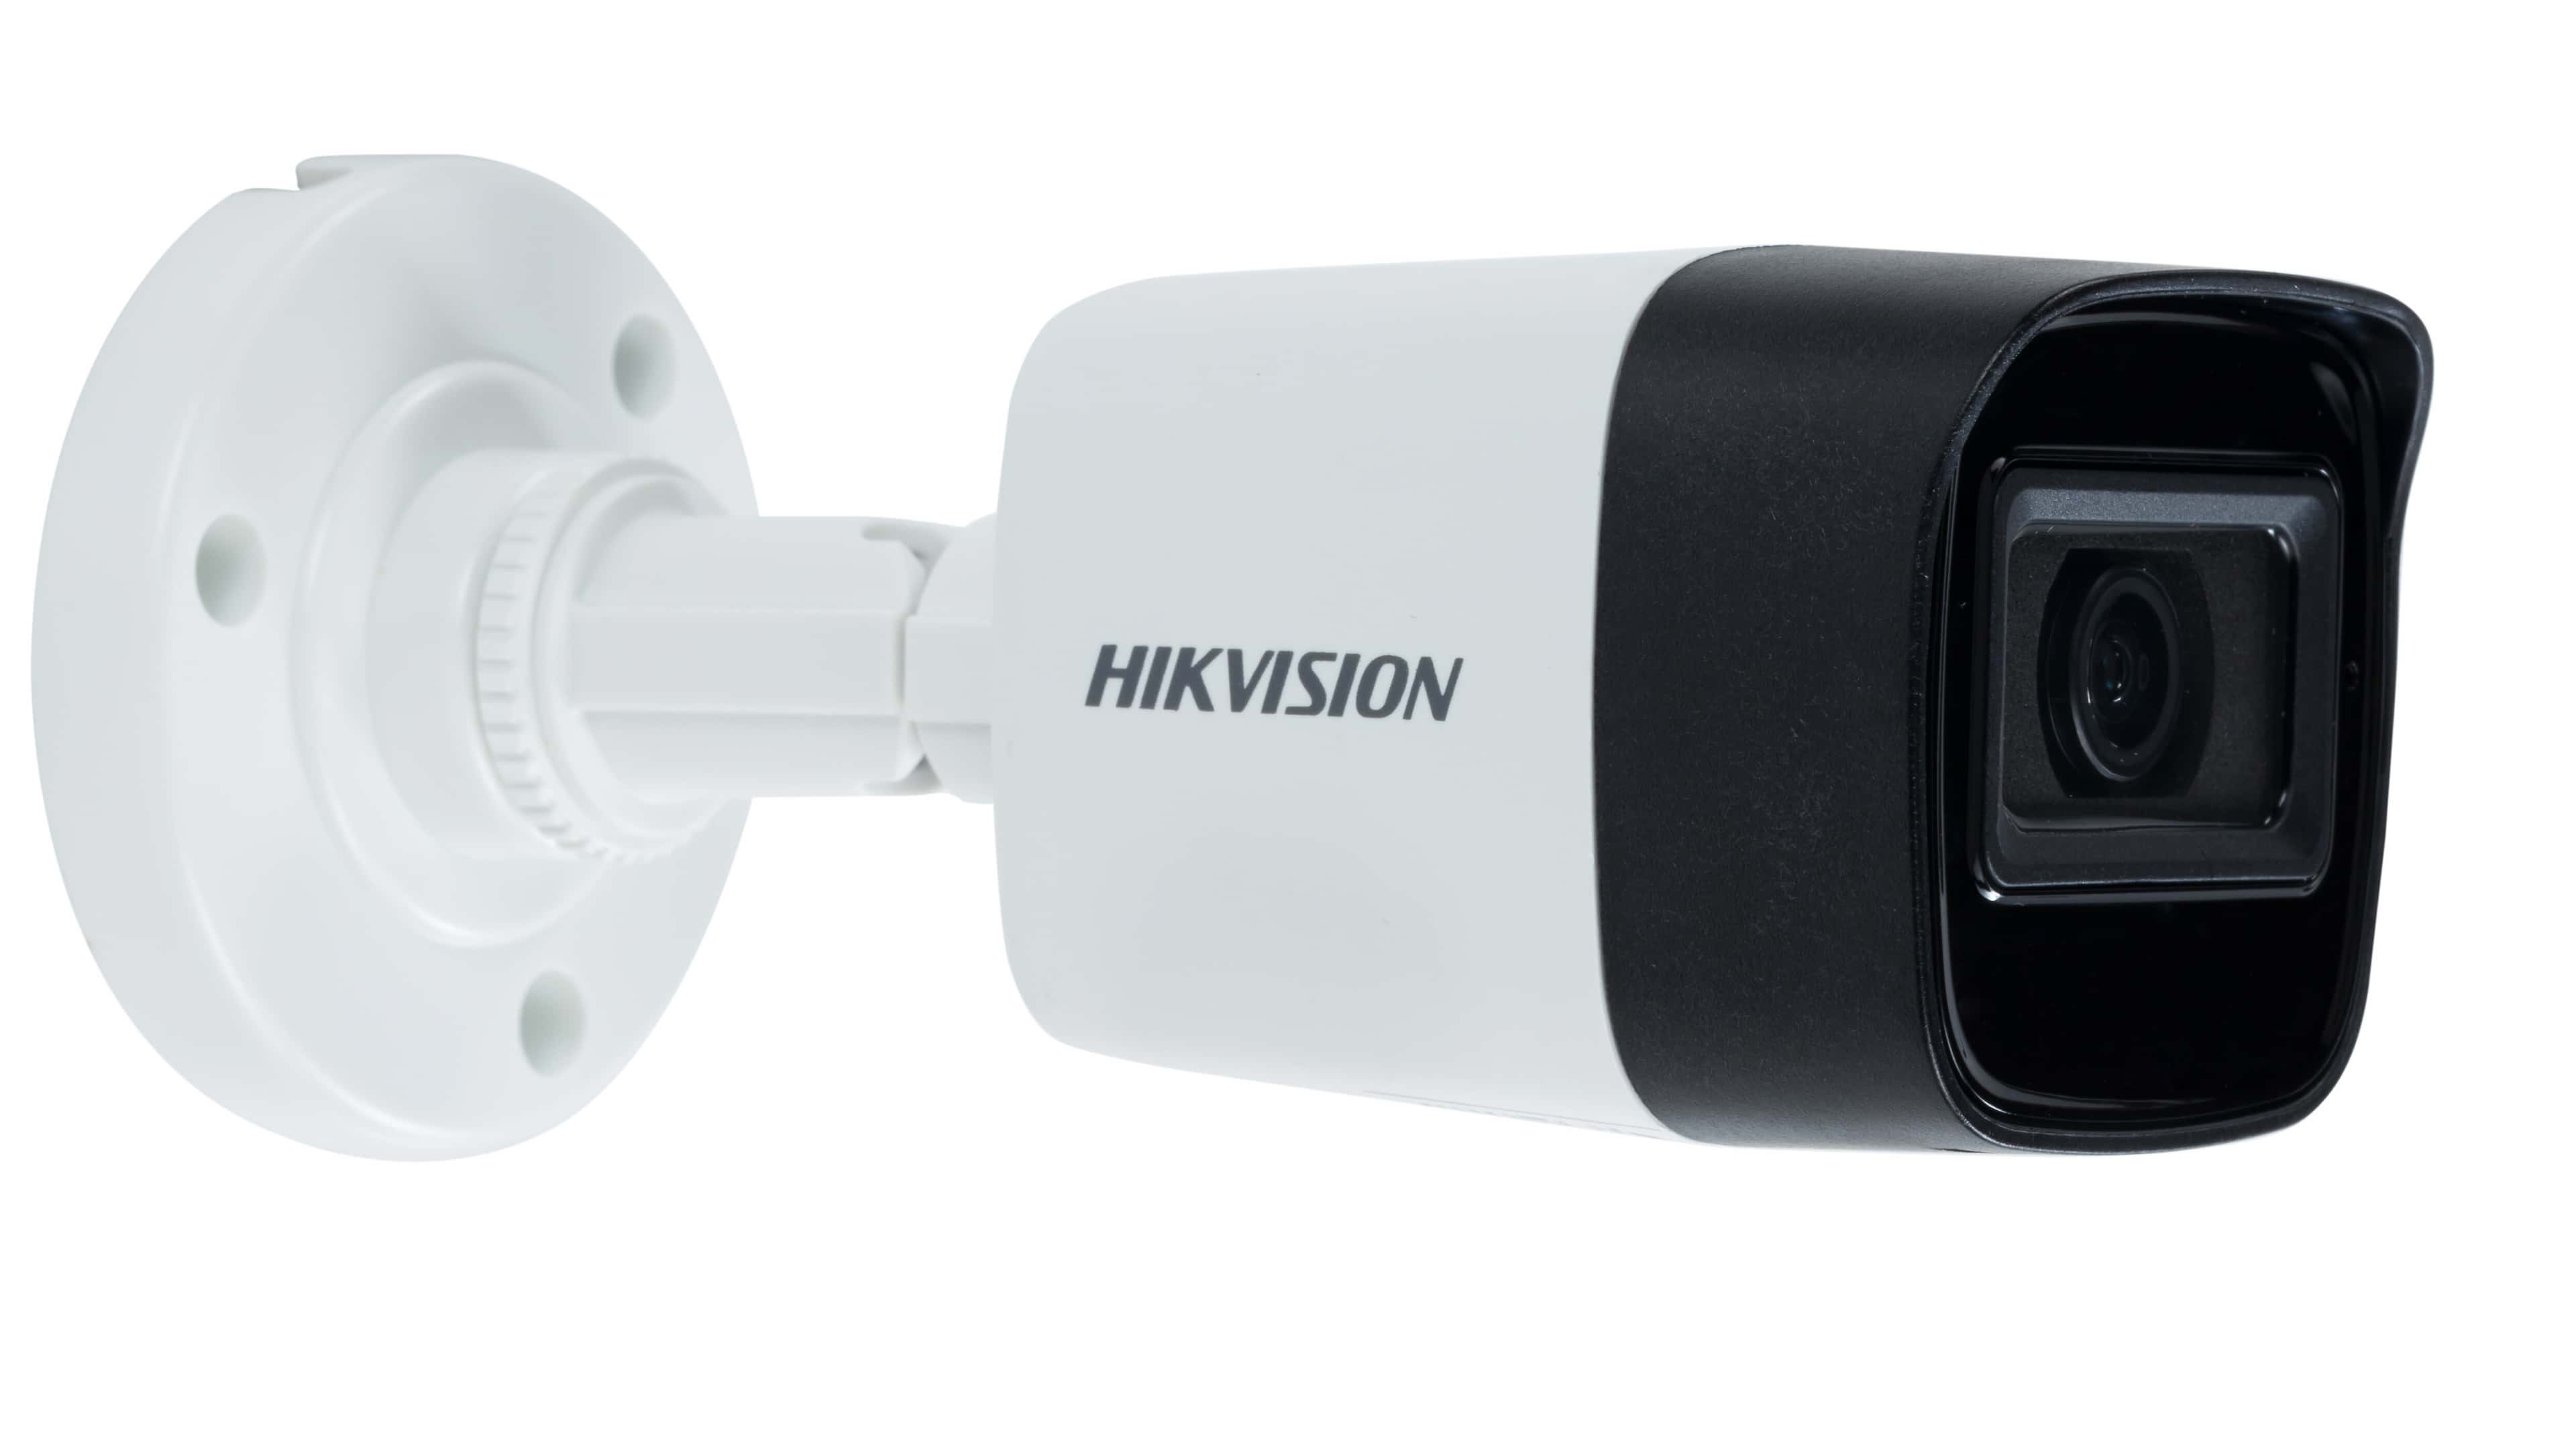 Hikvision-5MP-Audio-Fixed-Mini-Bullet-Camera-DS-2CE16H0T-ITPFS-image_1